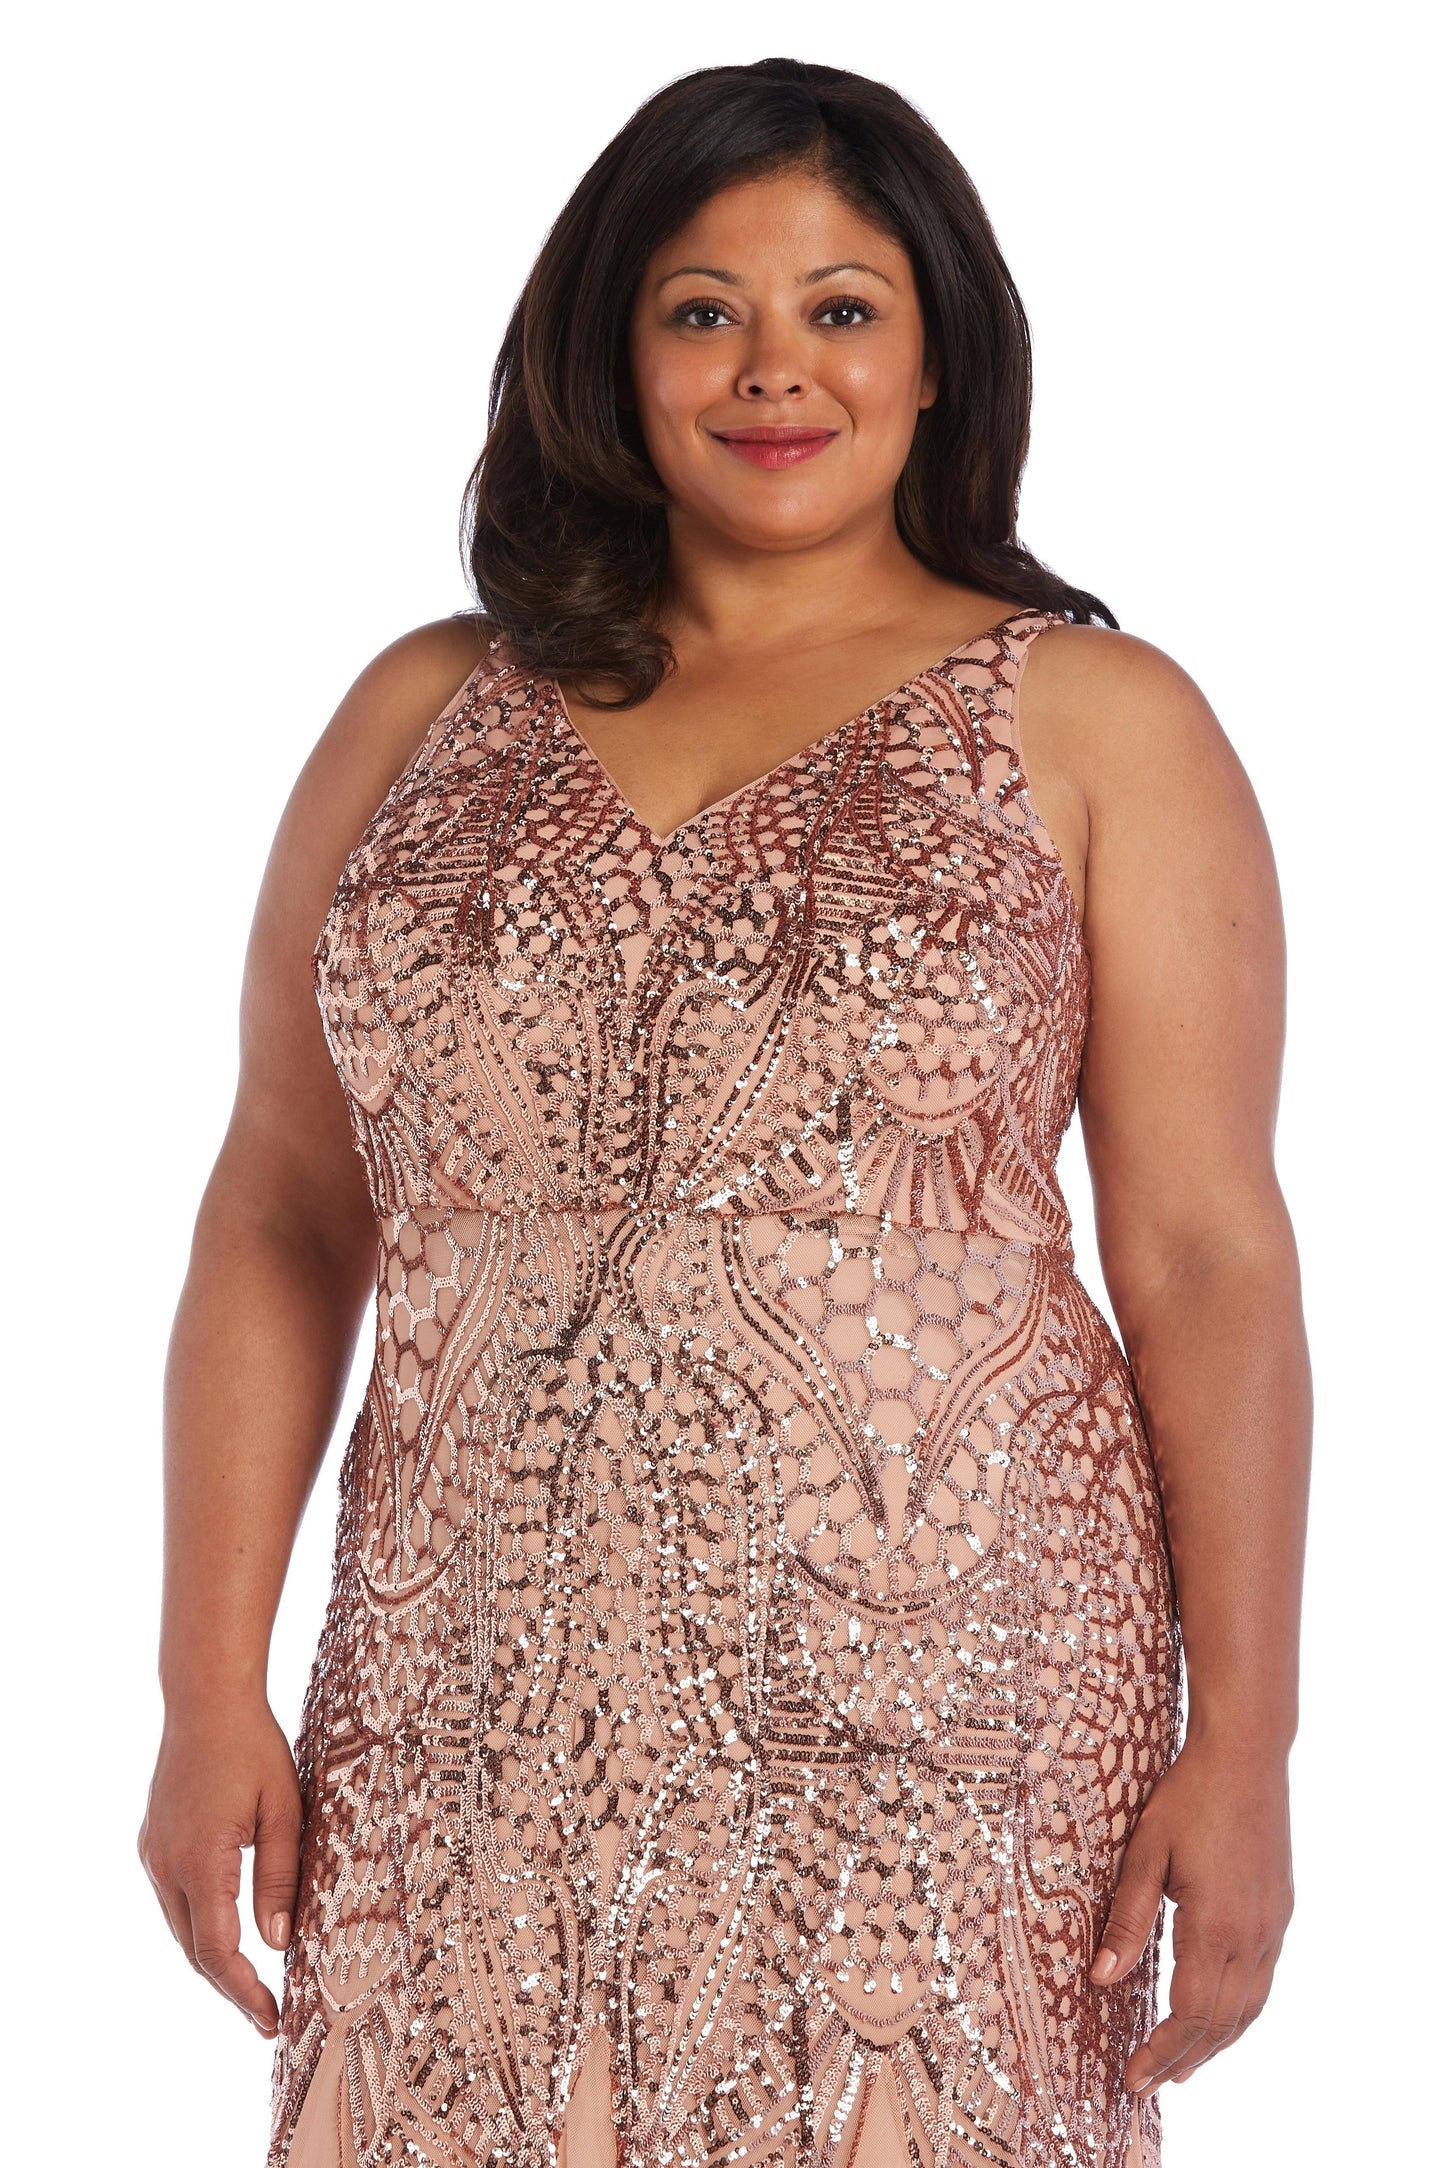 Nightway Long Plus Size Formal Dress Sale - The Dress Outlet